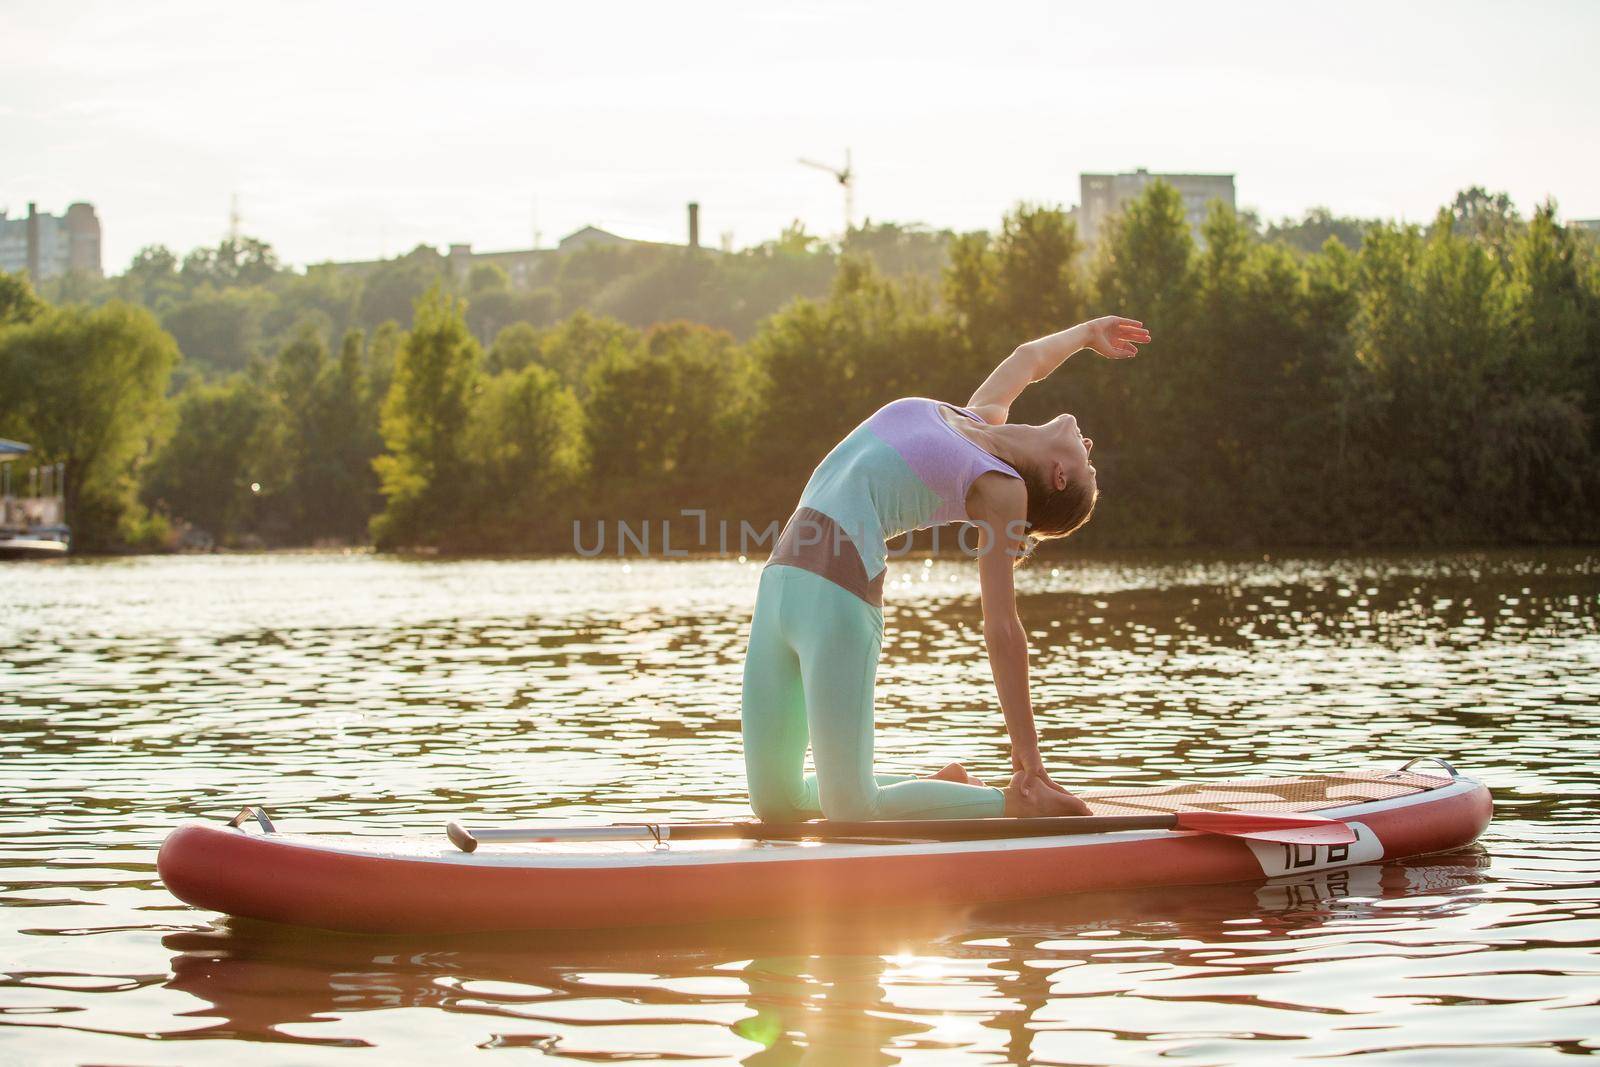 Young woman doing yoga on sup board with paddle. Yoga pose, side view - concept of harmony with the nature, free and healthy living, freelance, remote business.